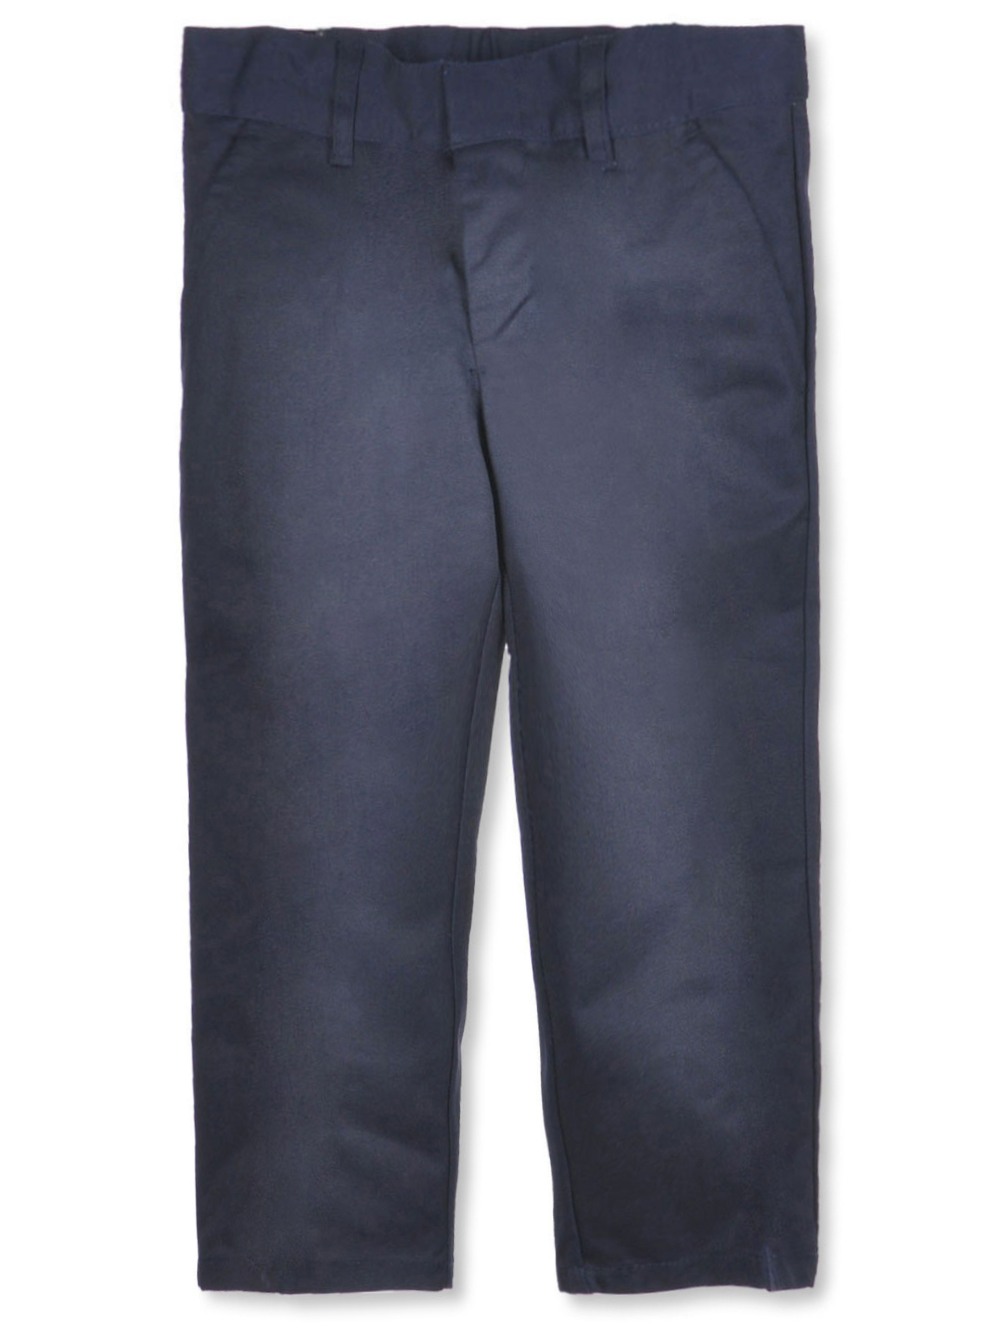 At School by French Toast French Toast Boys' Wrinkle No More Relaxed Fit Pants